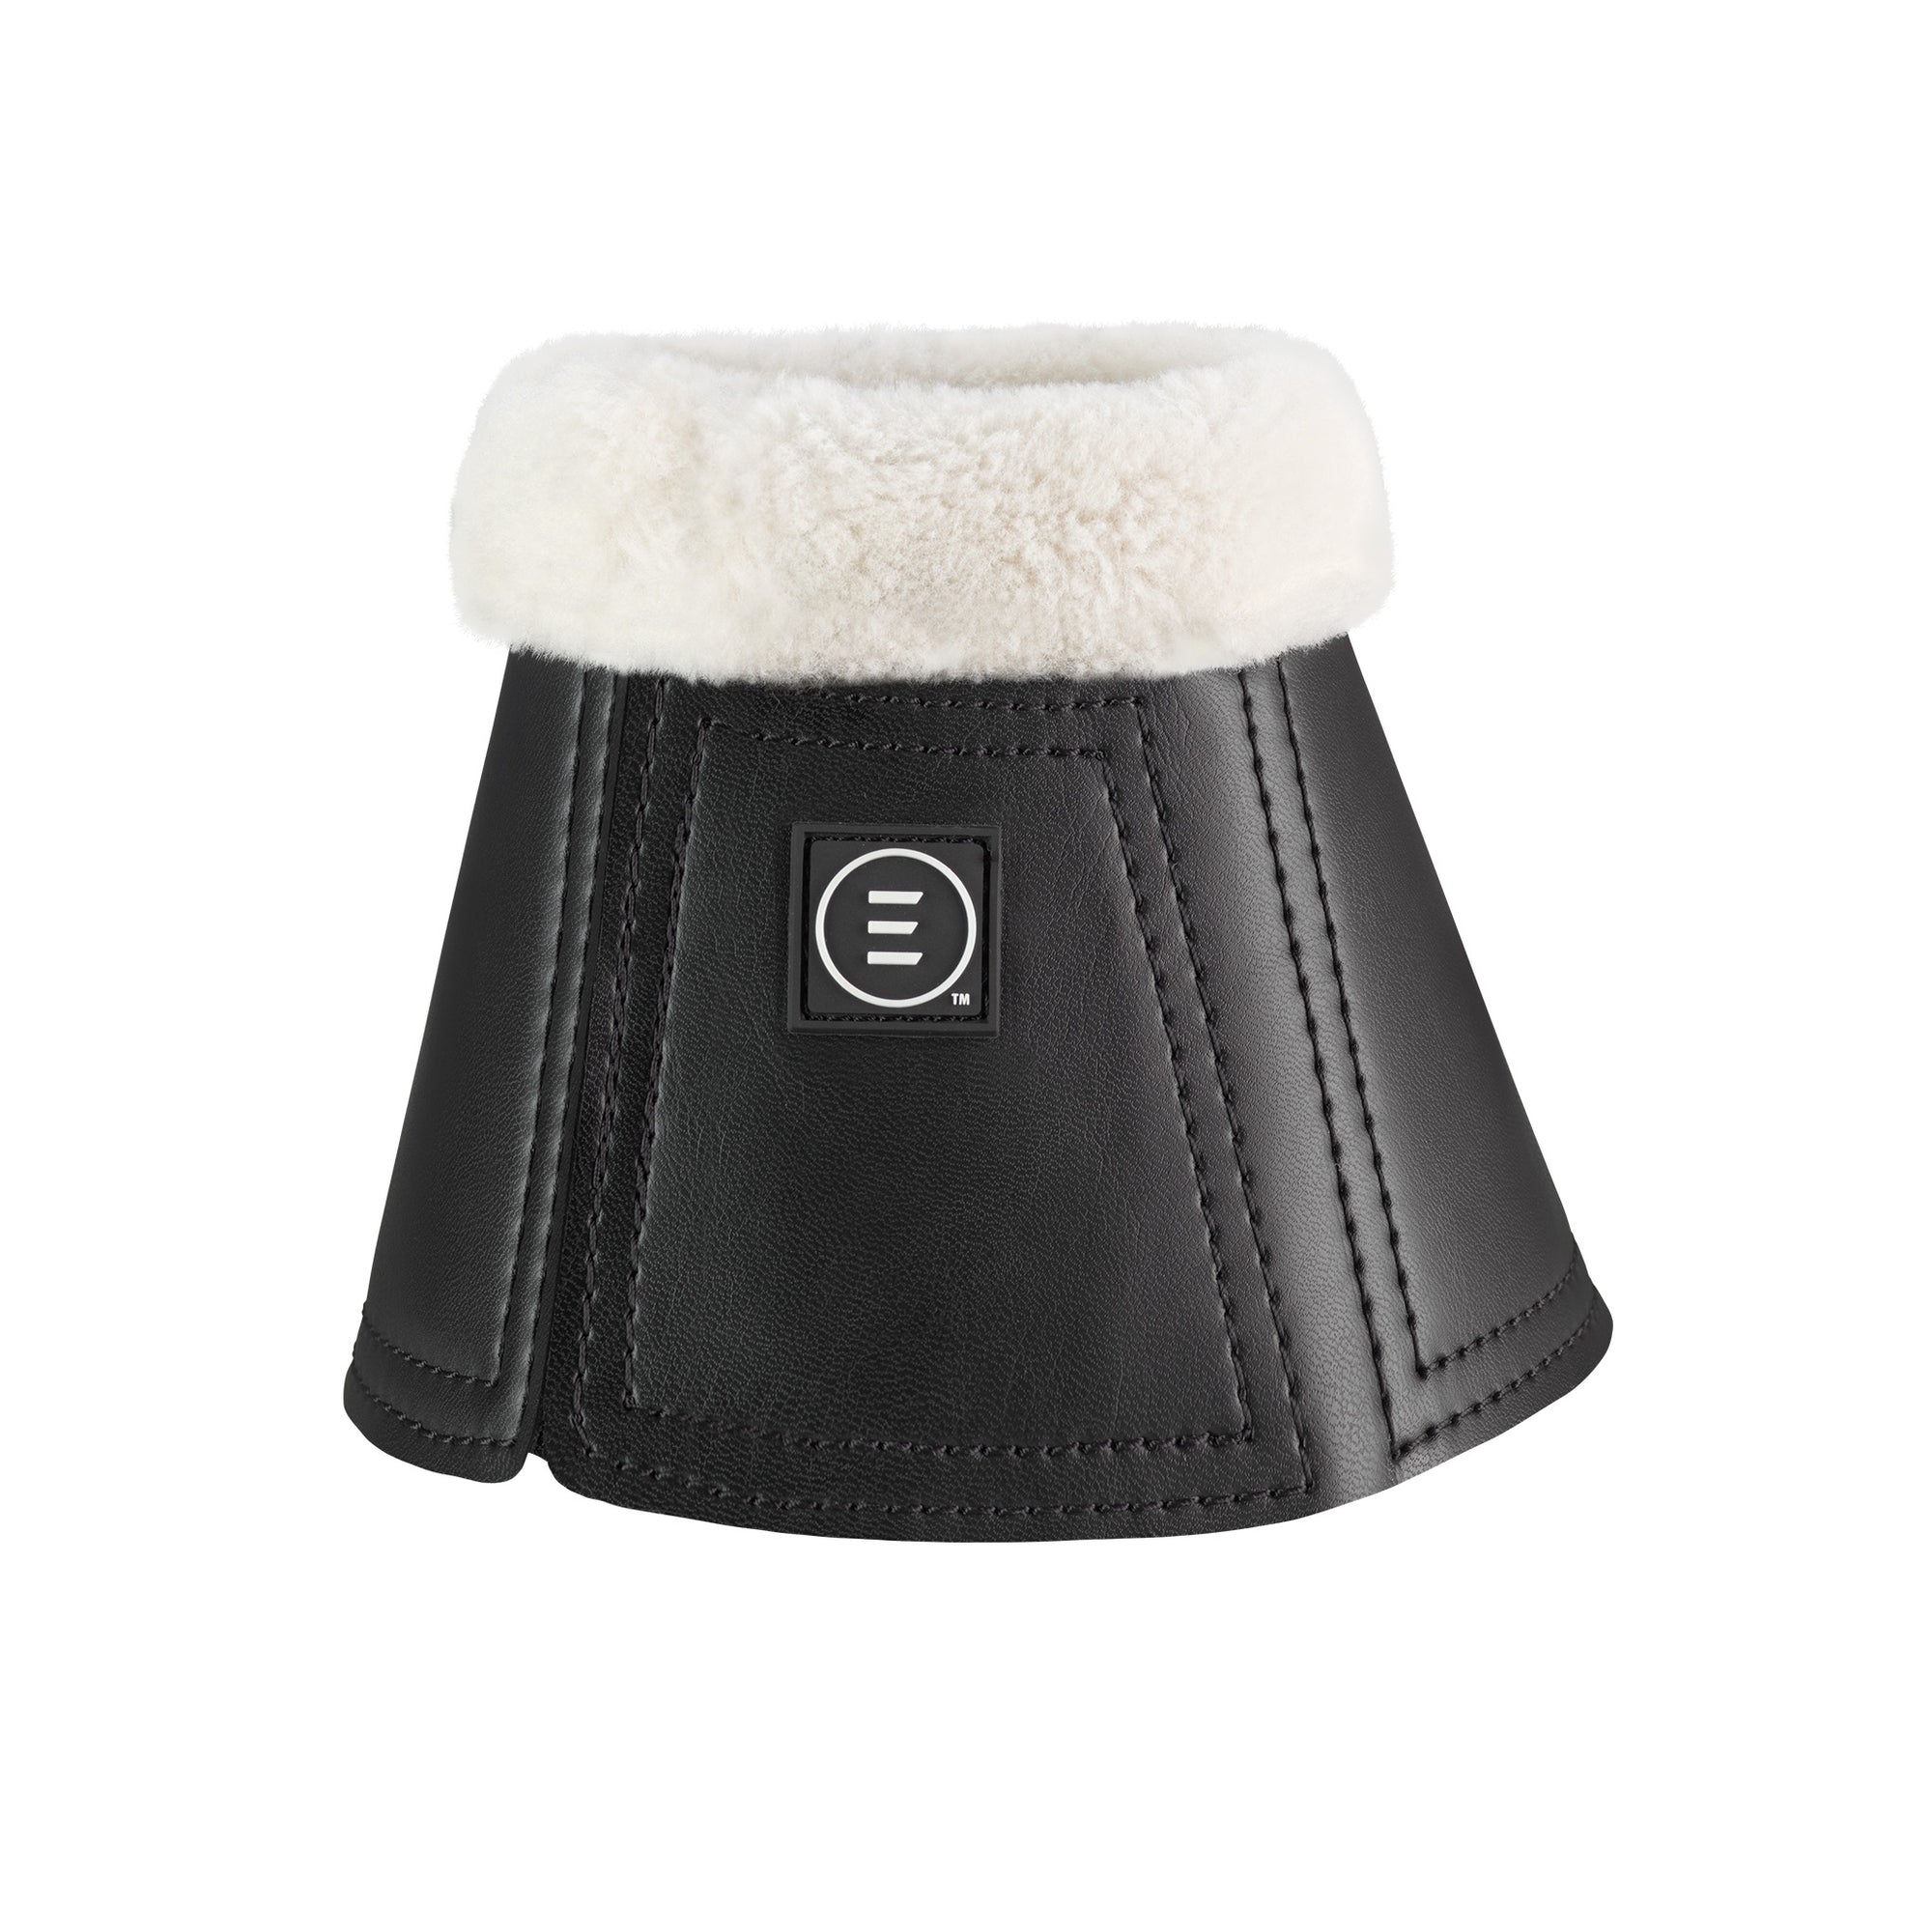 EquiFit BellBoots with UltraWool Top